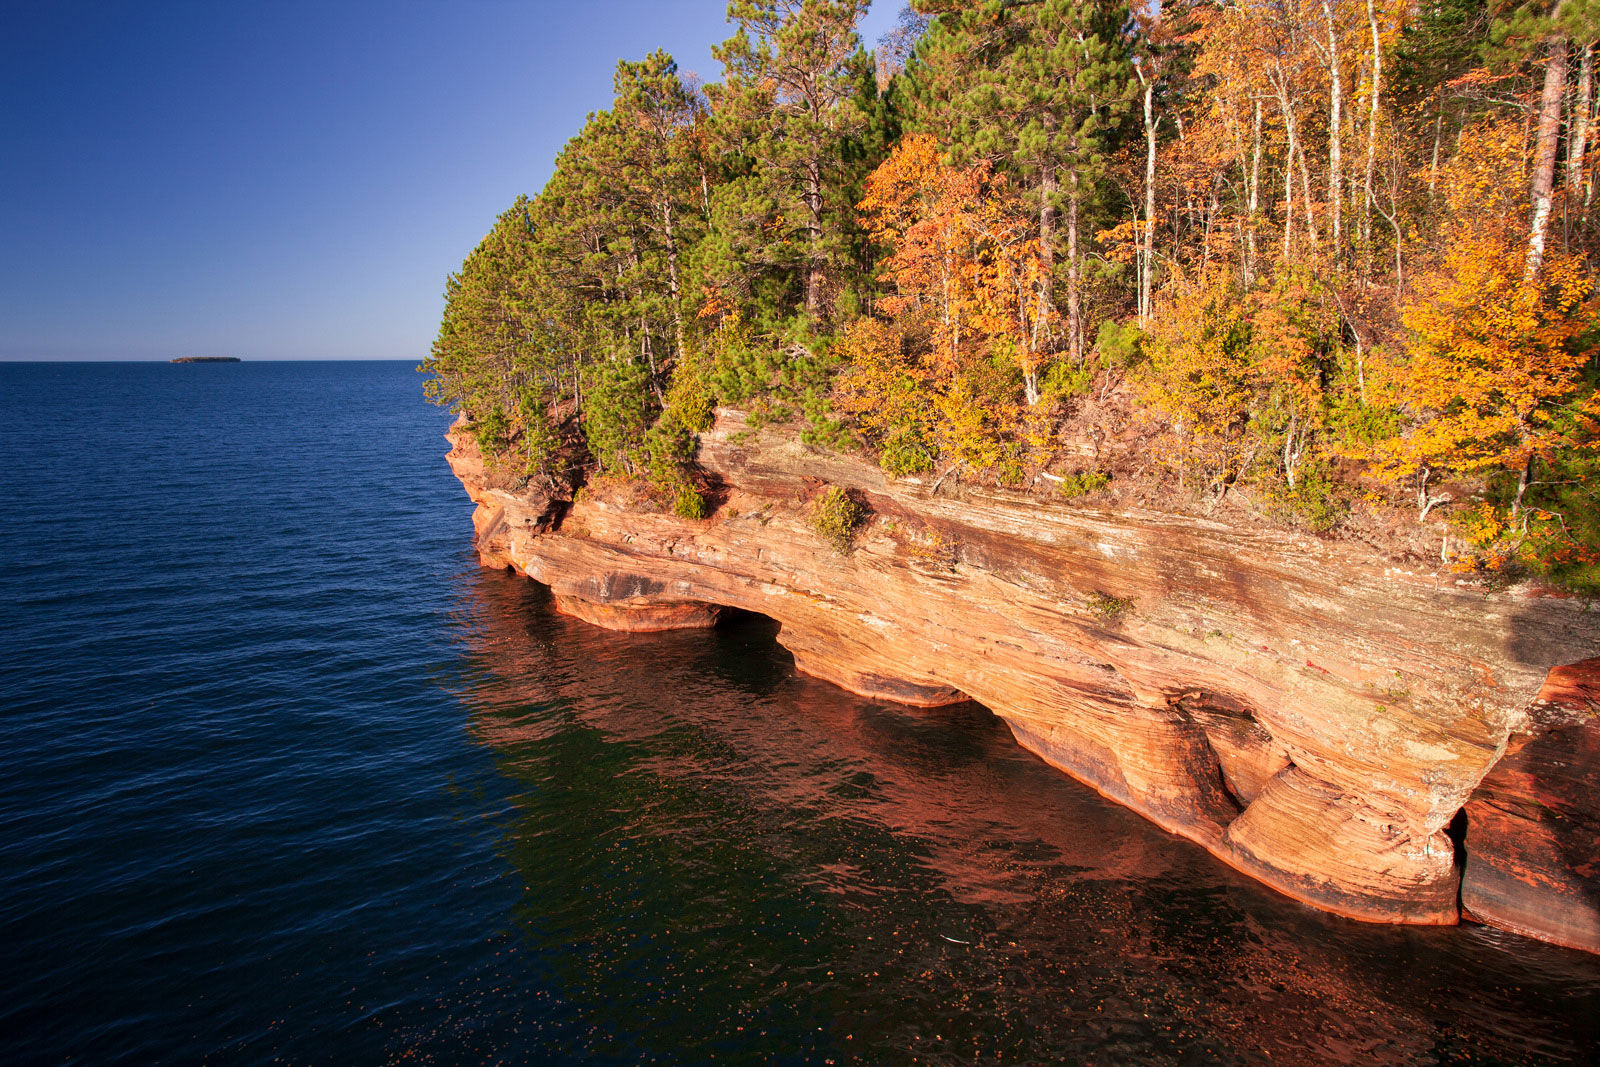 Mainland Sea Caves at Meyer's Beach in the Apostle Islands with fall colorw.